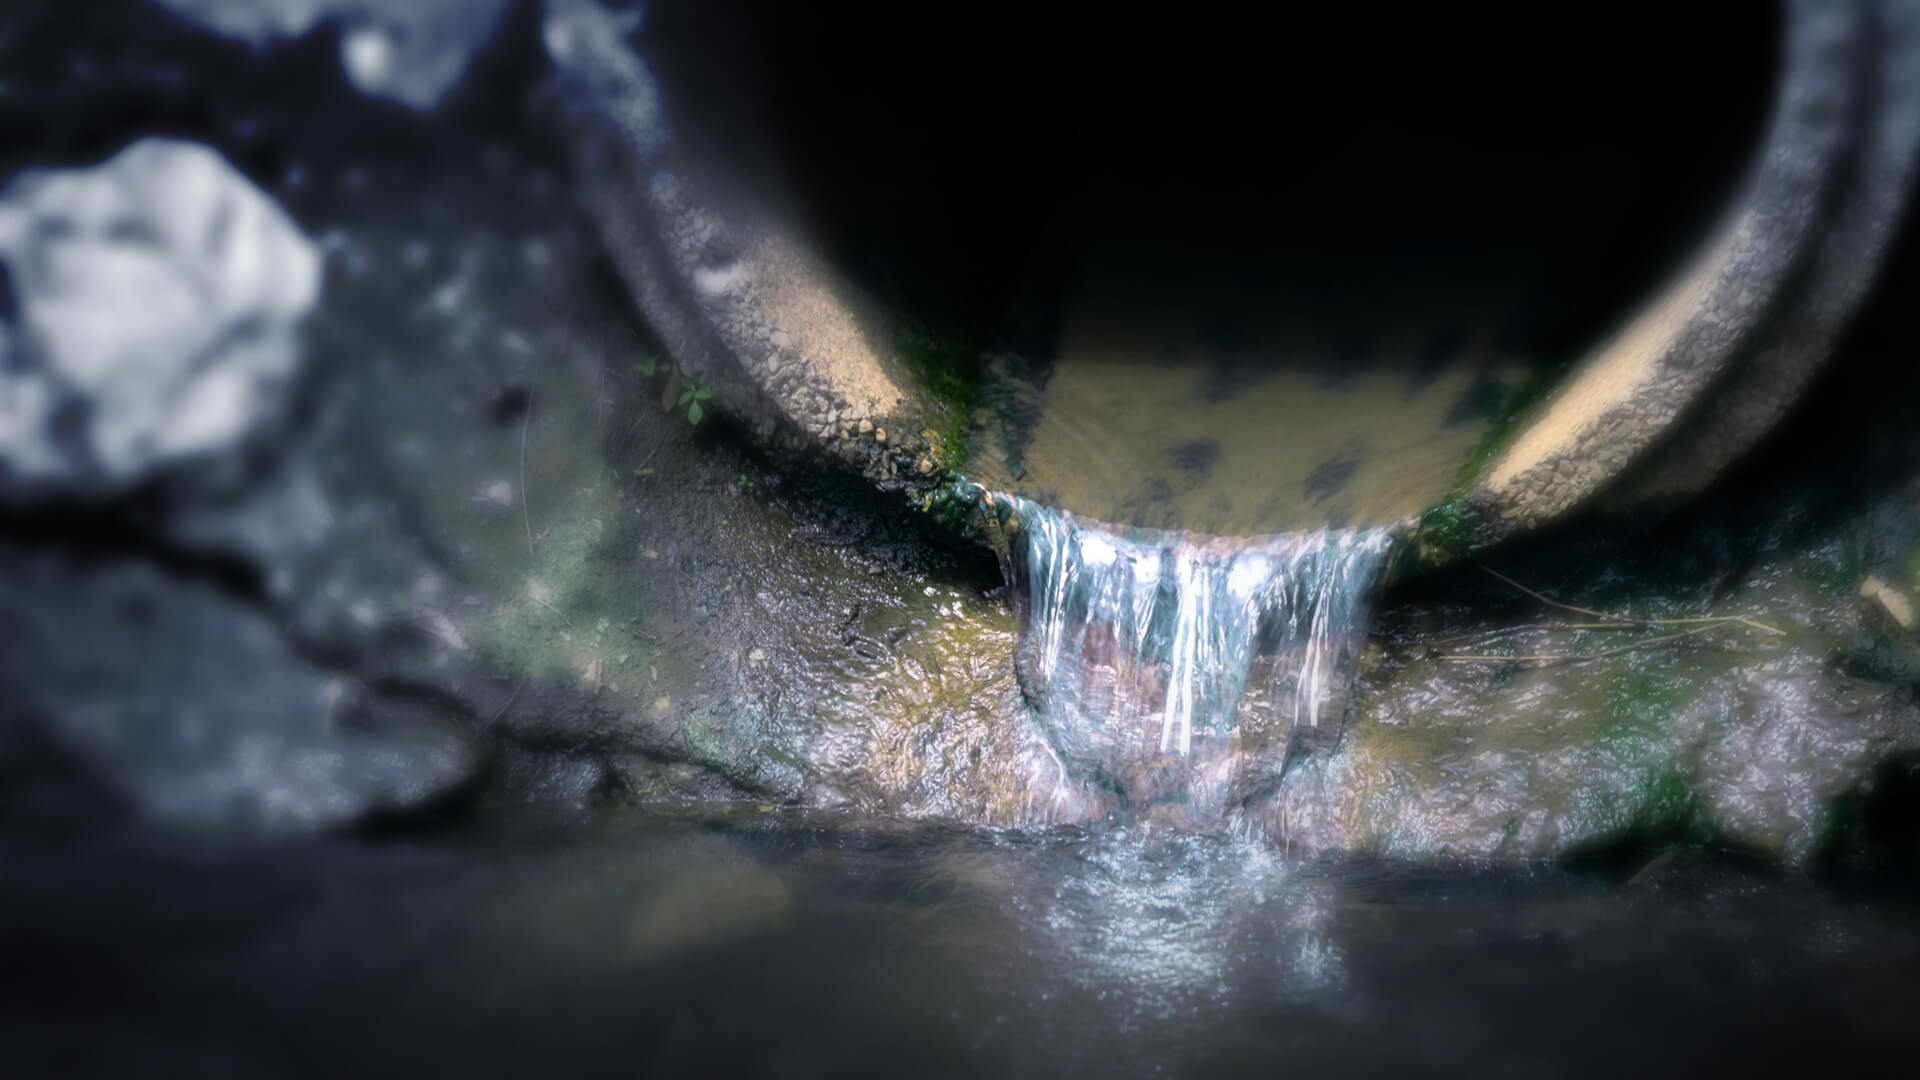 Contaminated water flows from a pipe into a body of water